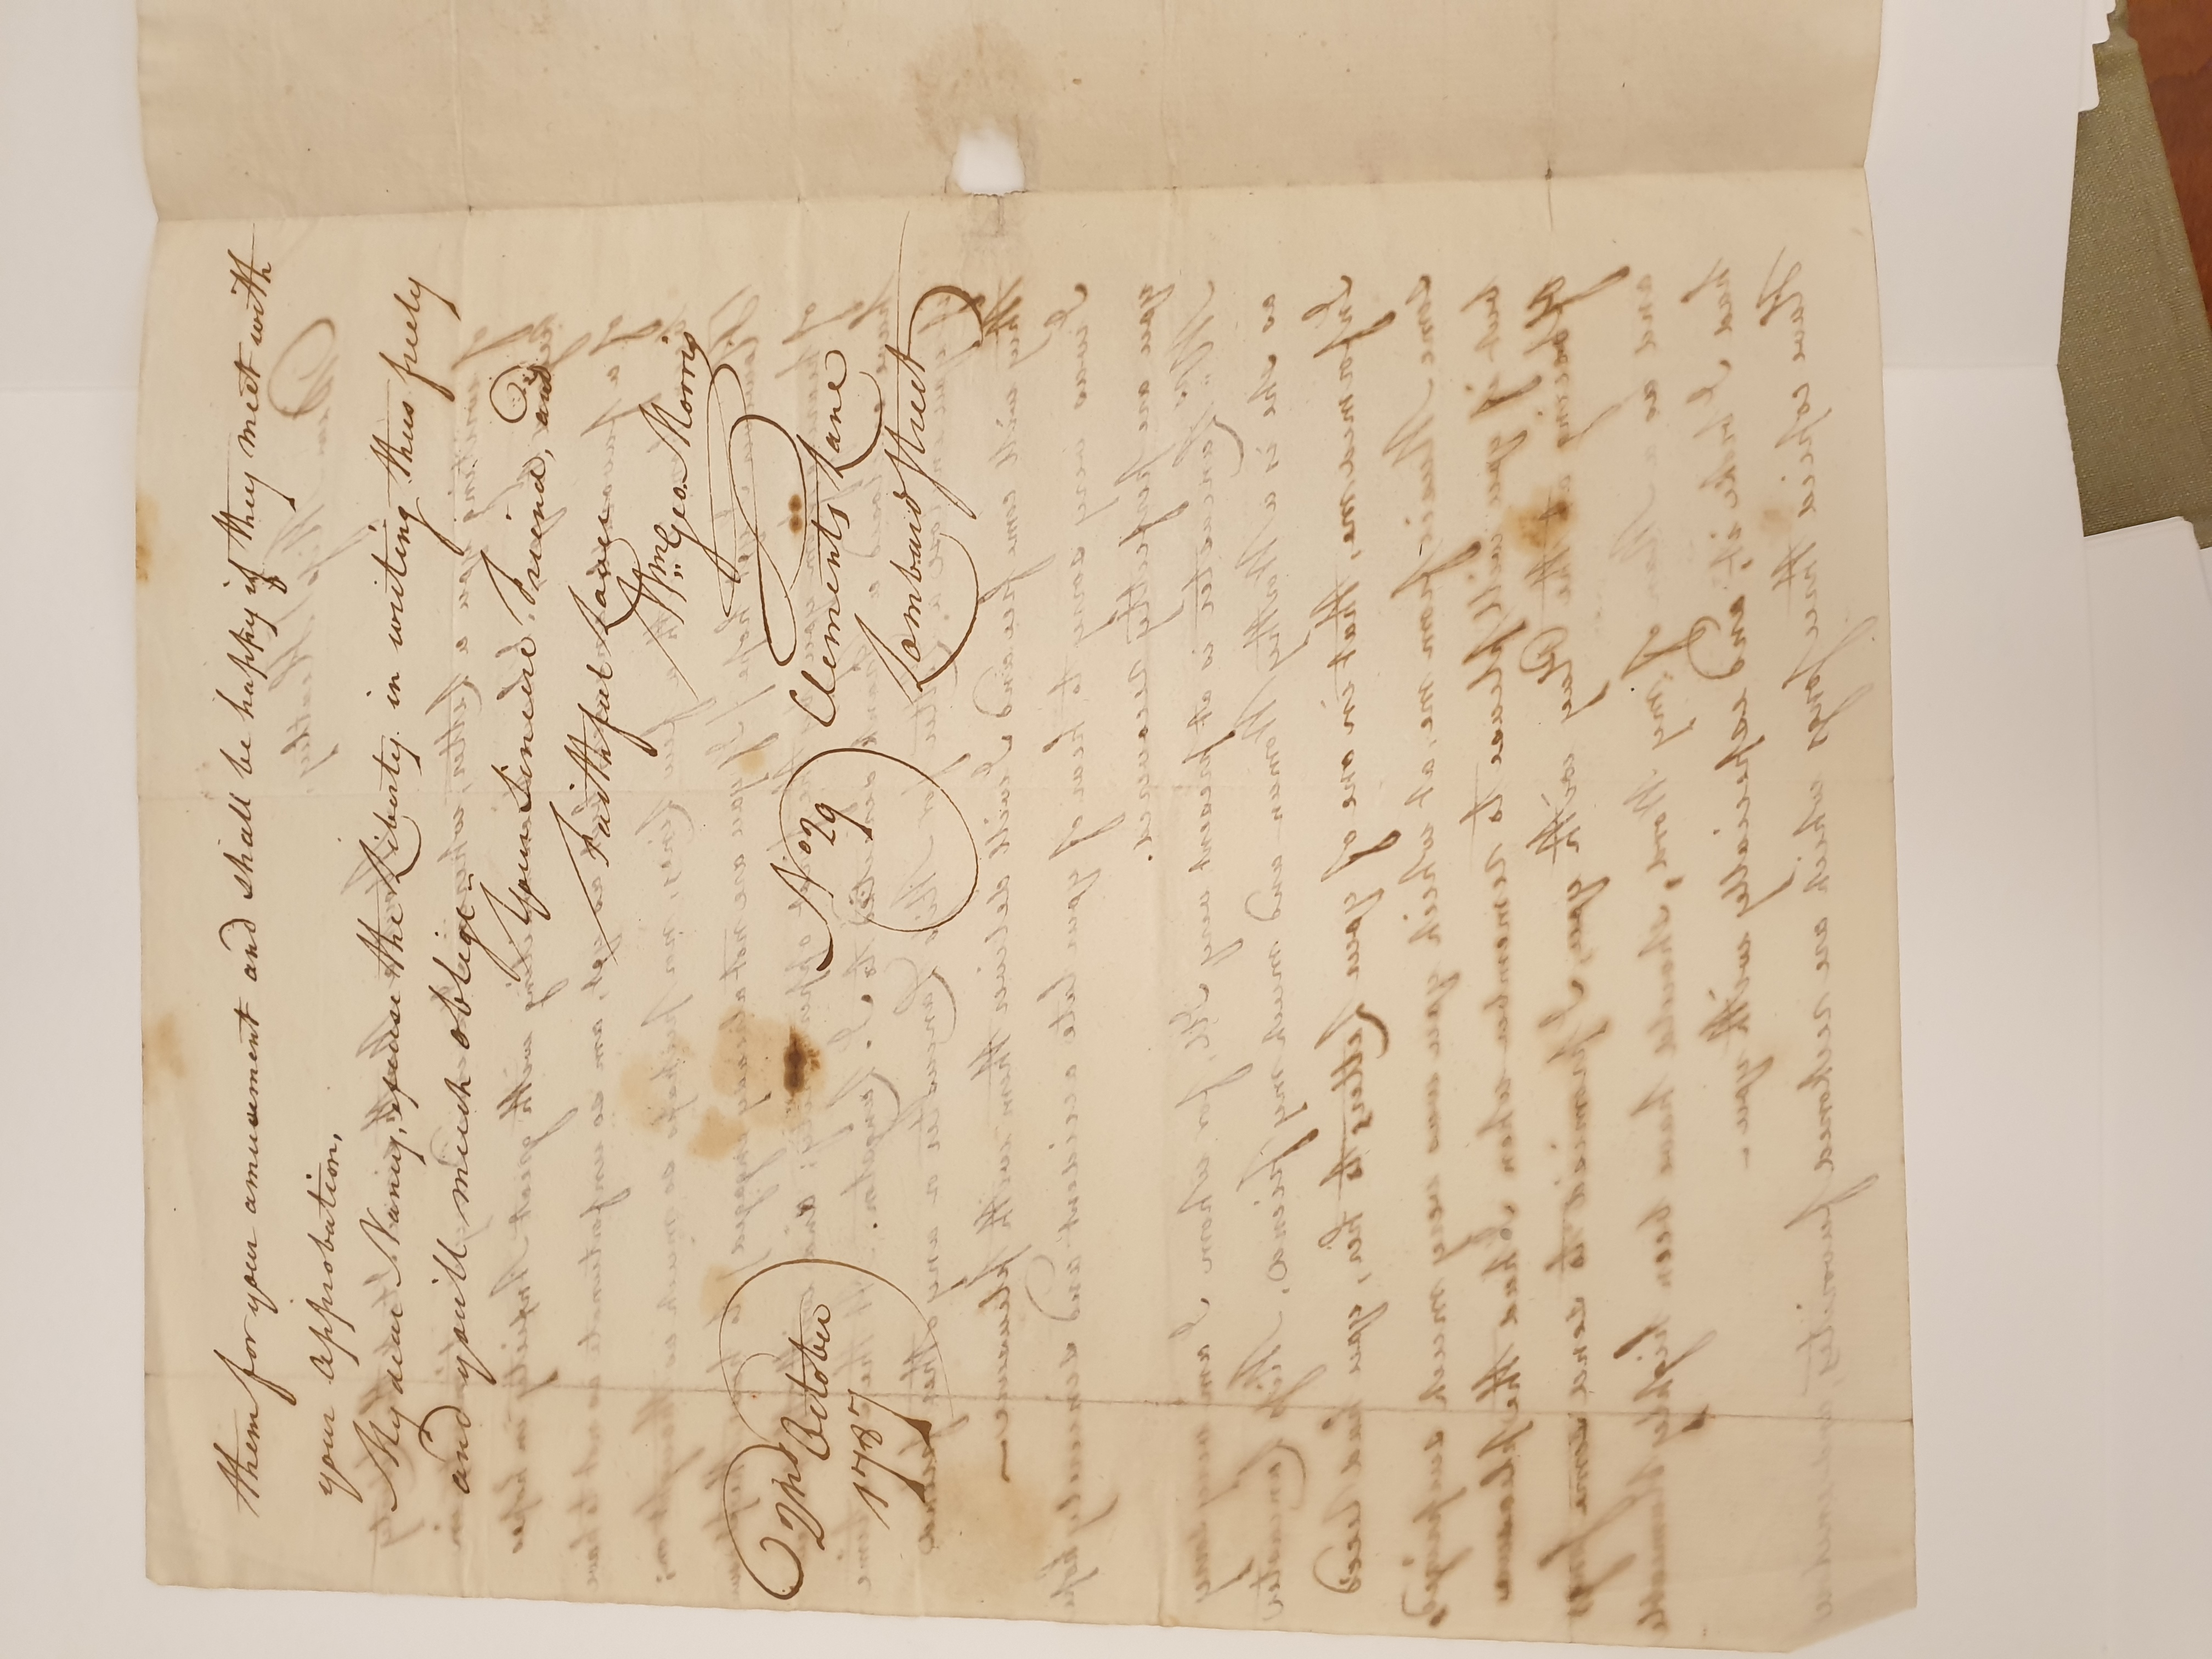 Image #2 of letter: William George Morris to Ann Heatley, 2 October 1787